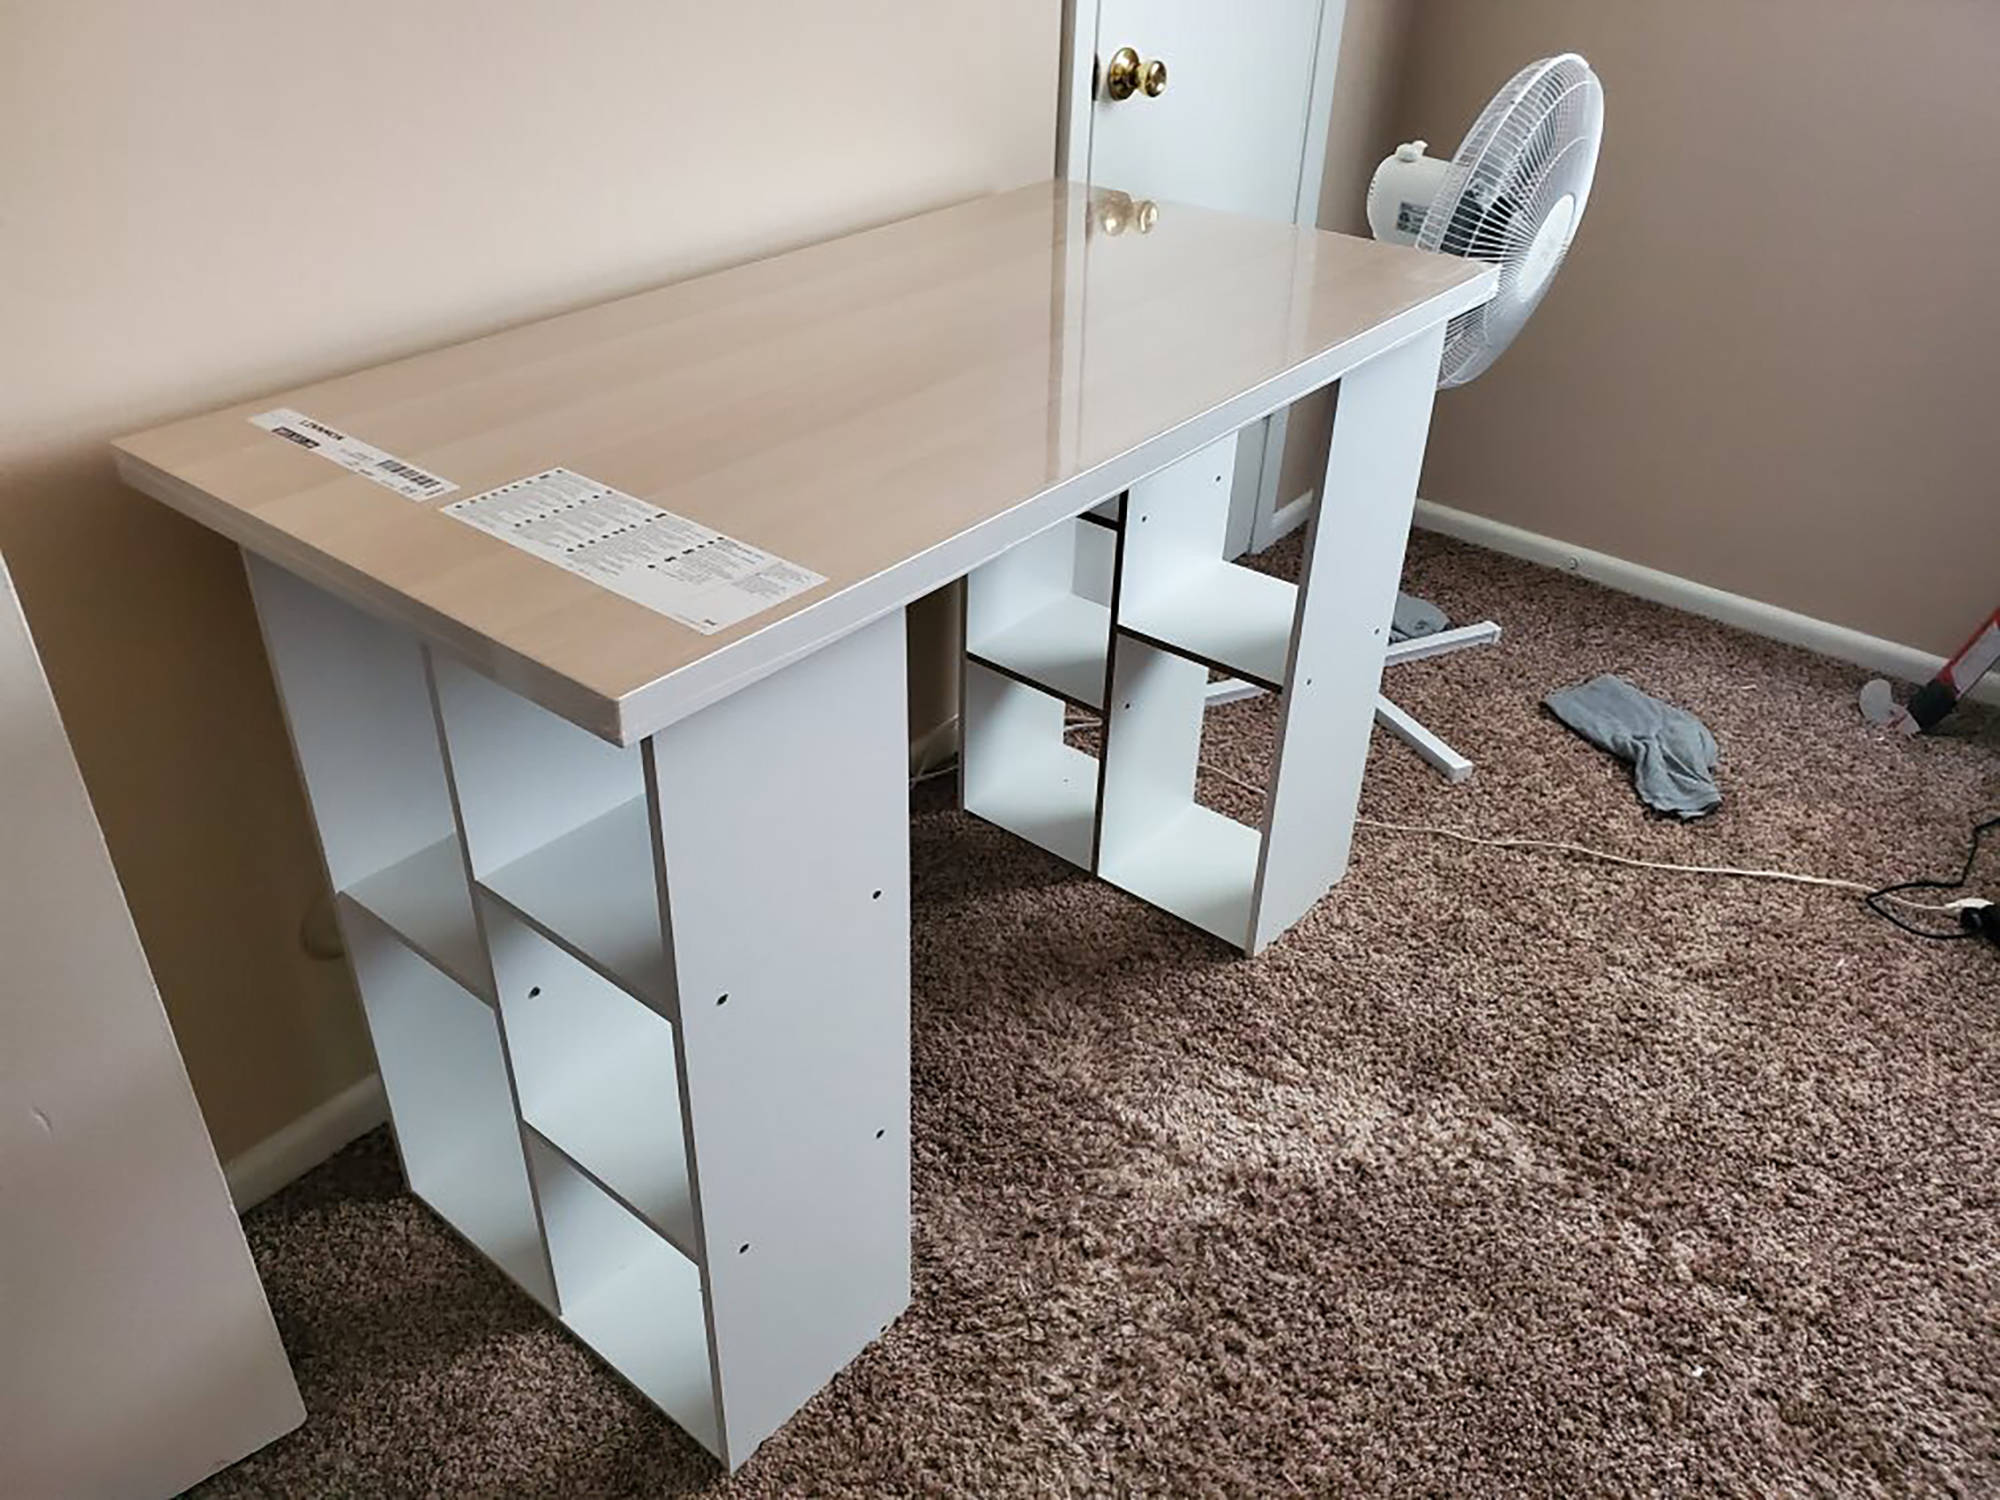 In this photo provided by Megan Fry, a desk Fry constructed out of a legless tabletop and bookcases stands in her Indianapolis home on Sept. 14, 2020. First it was toilet paper. Disinfectant wipes. Beans. Coins. Computers. Now, desks are in short supply because of the coronavirus pandemic. “It’s not as cute or trendy as a bought desk and I wish it had drawers for storage,” said Fry, who is starting a new work-from-home customer service job in Indianapolis in October. “But I’m happy it’s clean and has a large surface on top for my monitors and laptop.” (Courtesy Photo / Megan Fry)